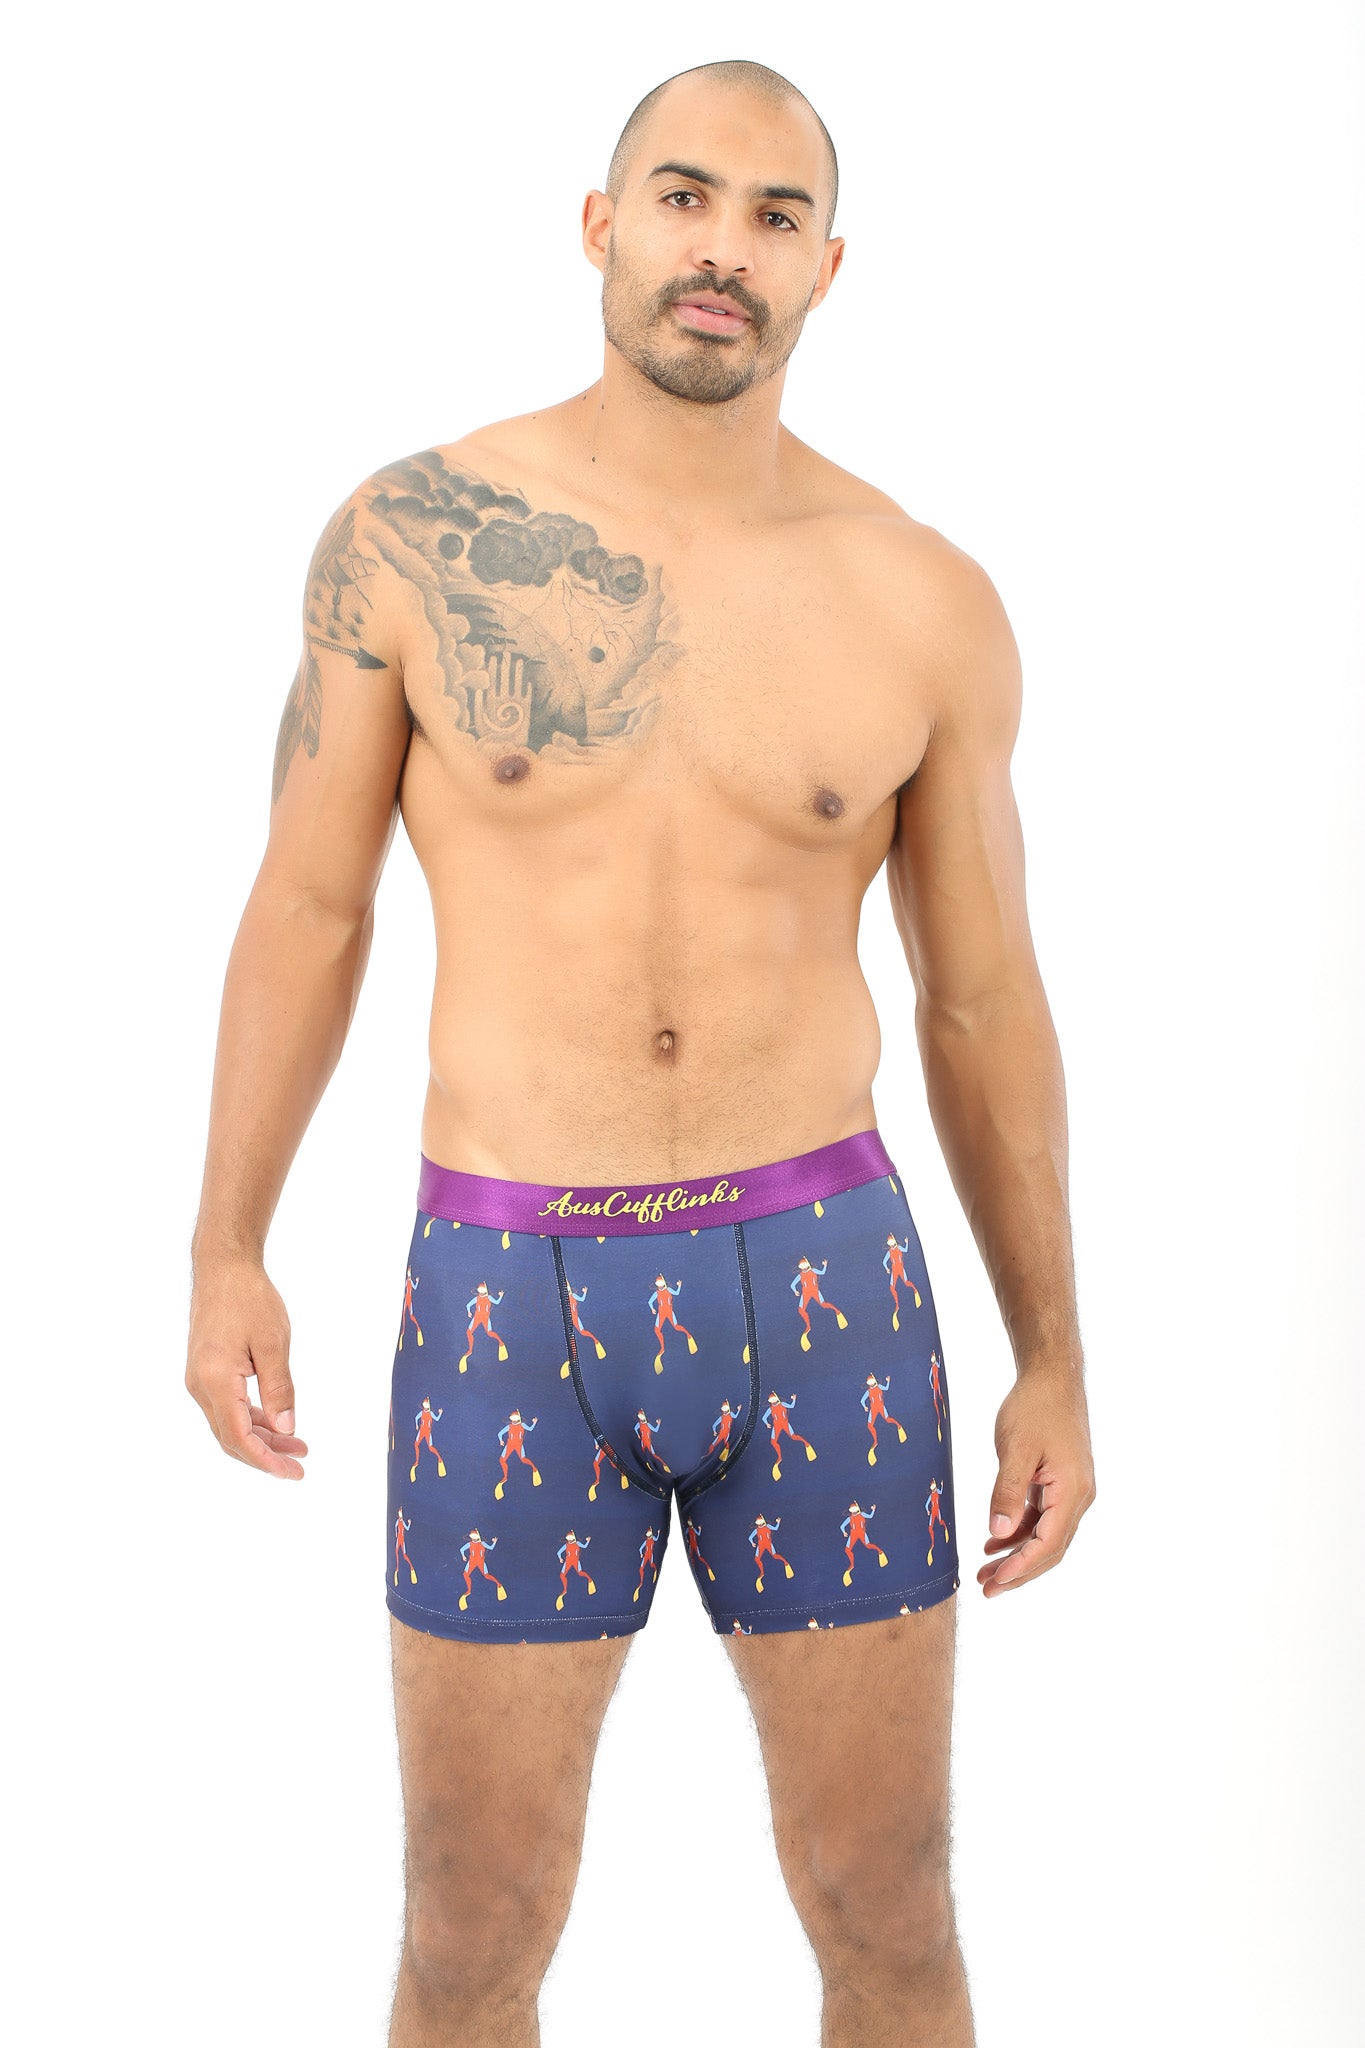 The man found deep comfort in wearing his Scuba Diver Underwear, as the shimmering purple added an abyss-like touch to his undergarment choice.